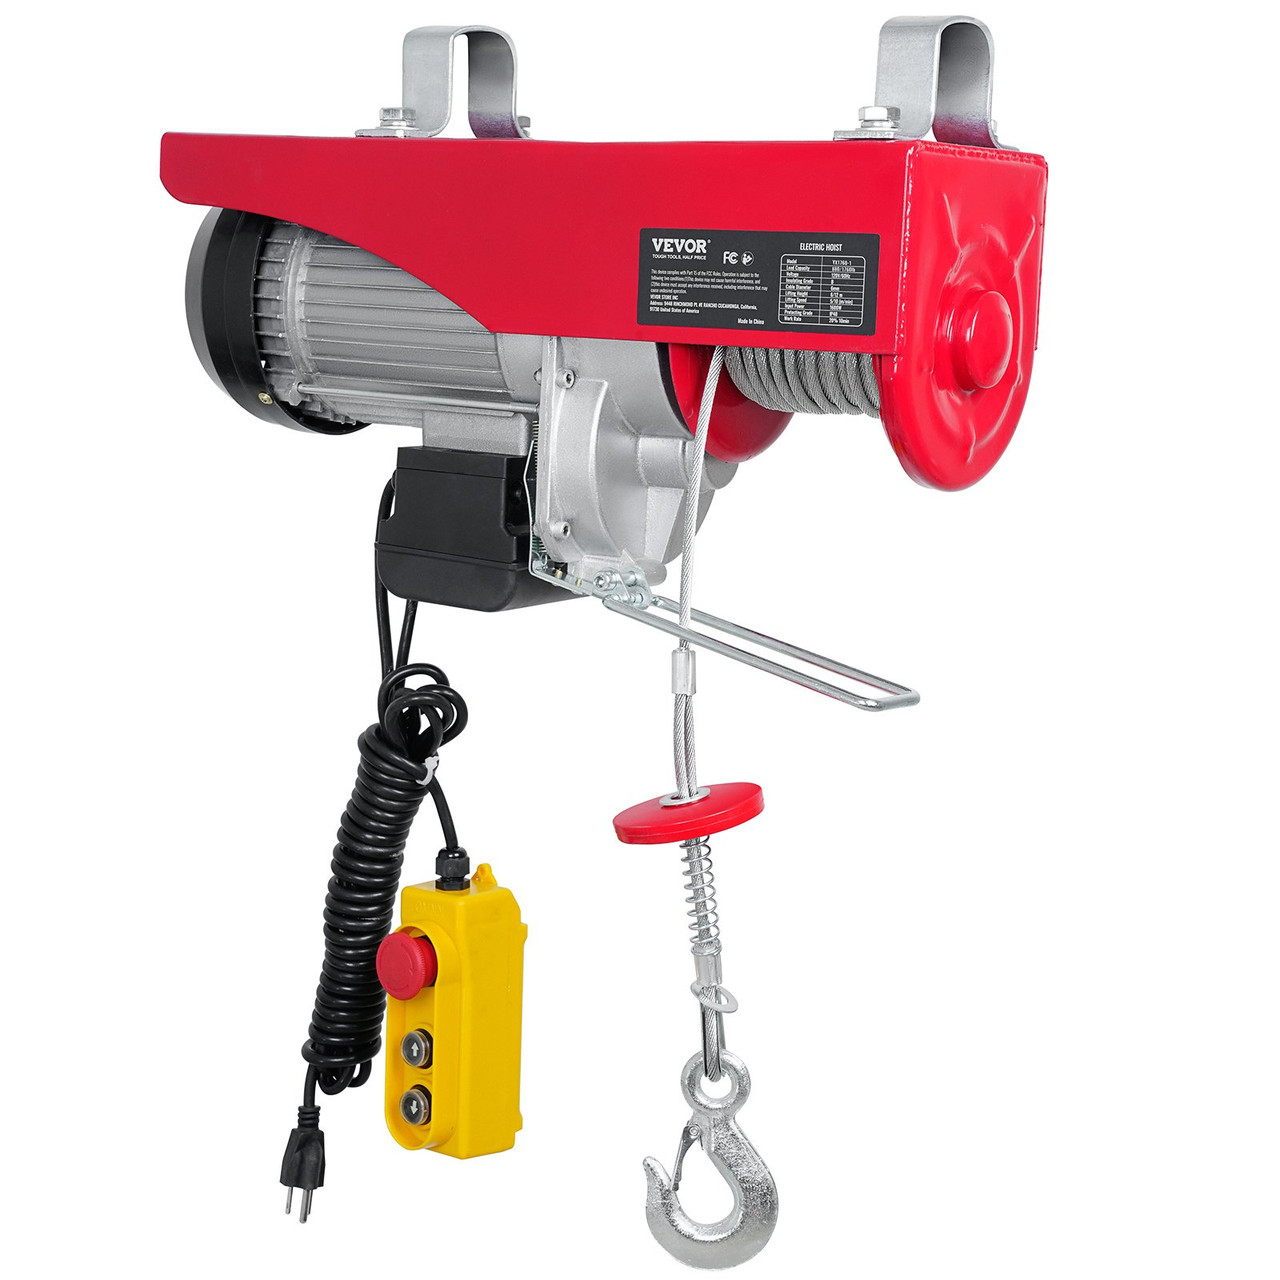 VEVOR Electric Hoist 1760lbs with 14ft Wired Remote Control, Electric Hoist 110 Volt with 40ft Single Cable Lifting Height & Pure Copper Motor, for Garage Warehouse Factory